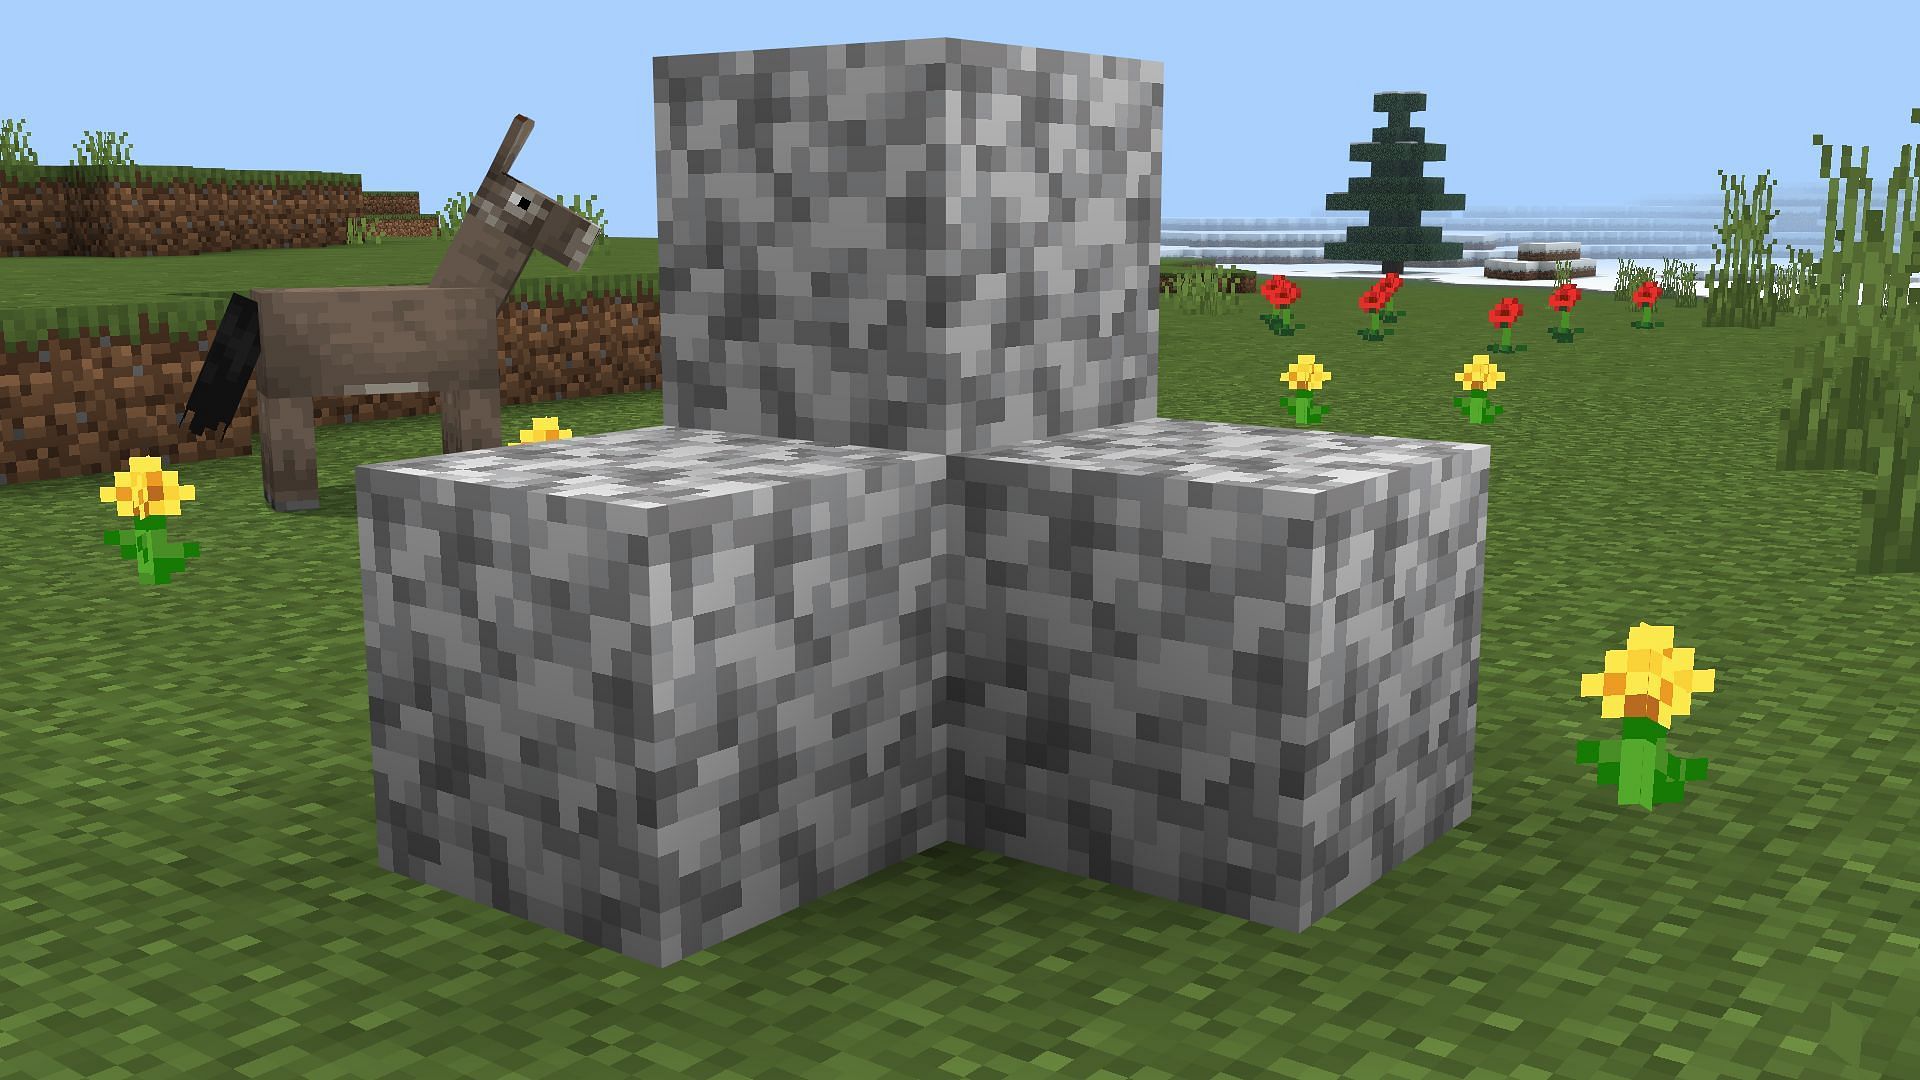 Diorite might not be considered one of the ugliest blocks if it receives new features in the future (Image via Mojang Studios)